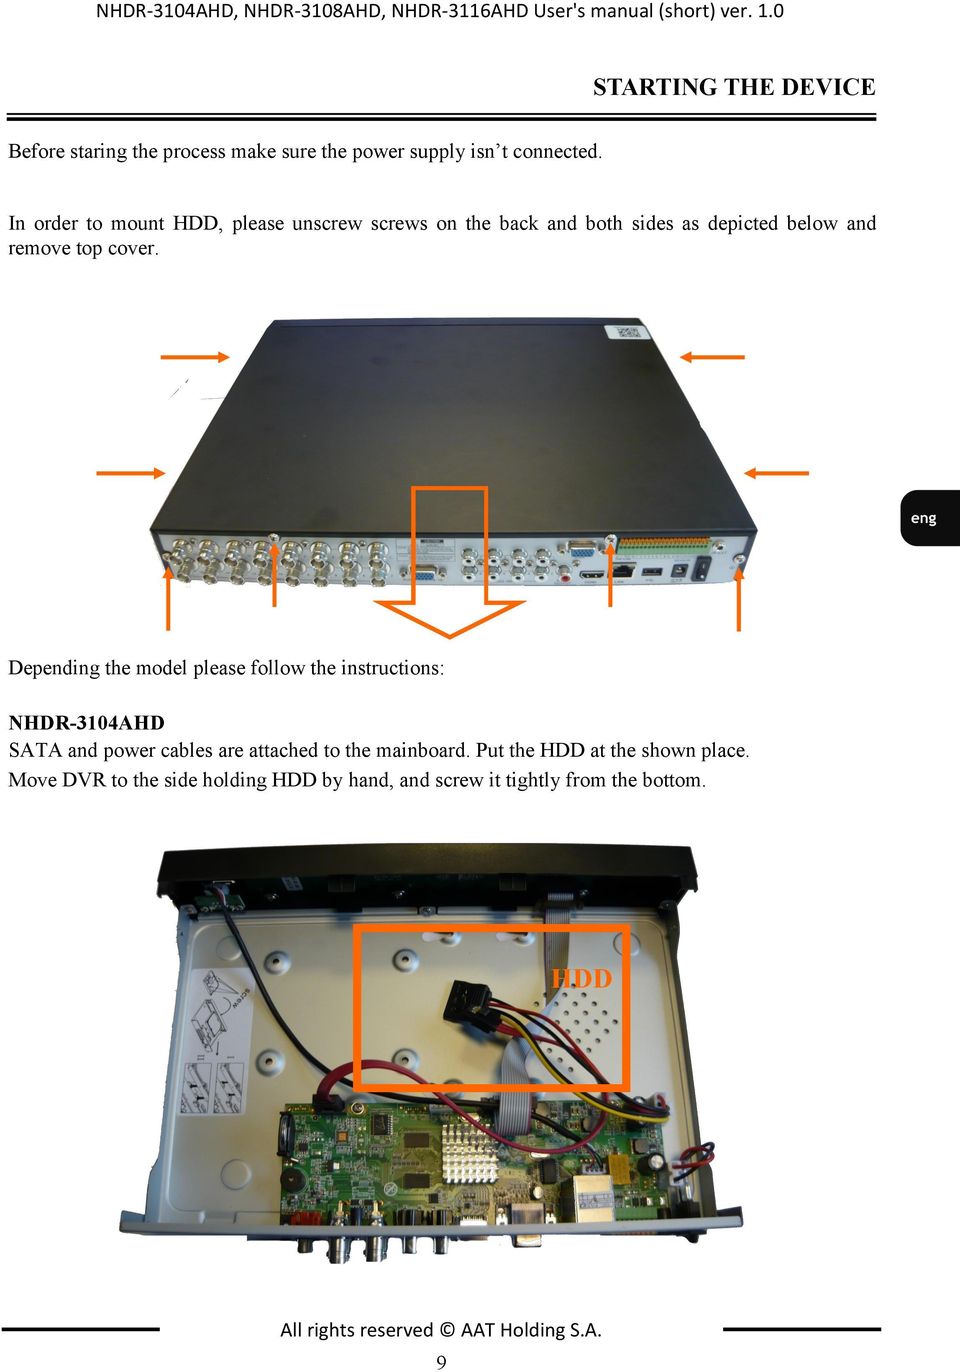 In order to mount HDD, please unscrew screws on the back and both sides as depicted below and remove top cover.